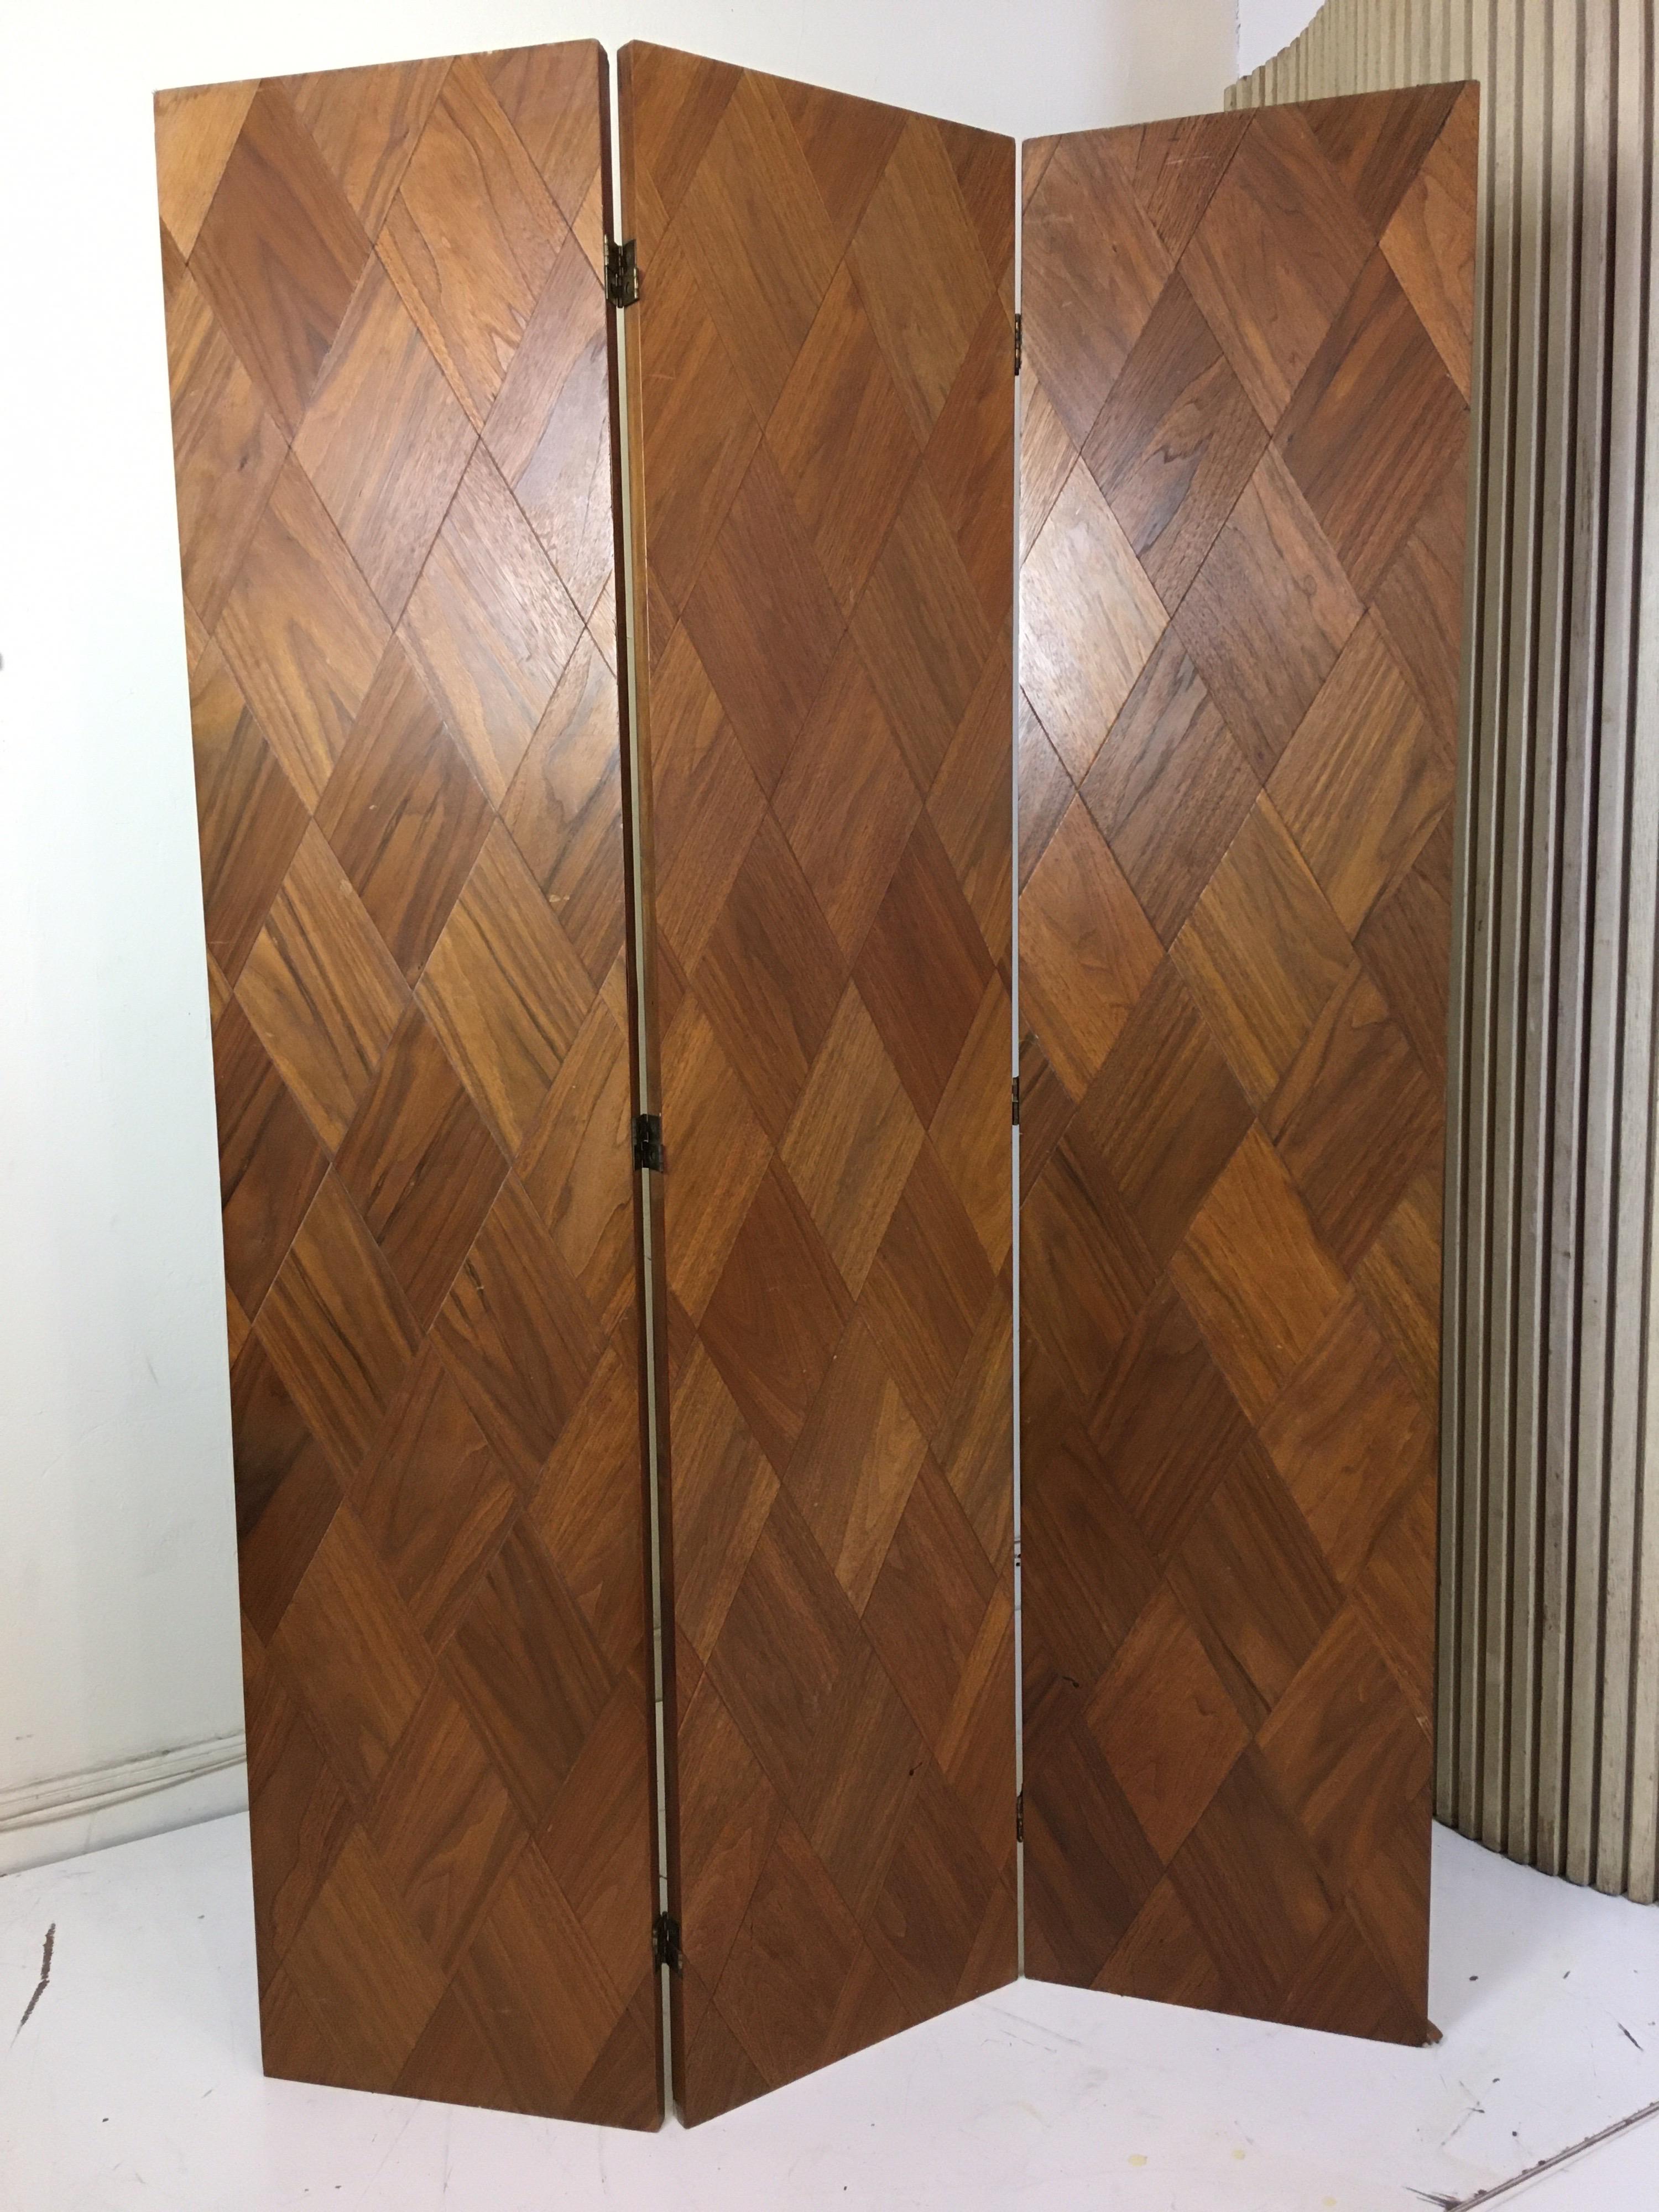 Walnut parquet 3-panel screen, Diamond shaped pieces of walnut cover both sides of all 3 sections. Folds flat for easy transporting. Each panel measures 15.75 wide and screen is just under 72